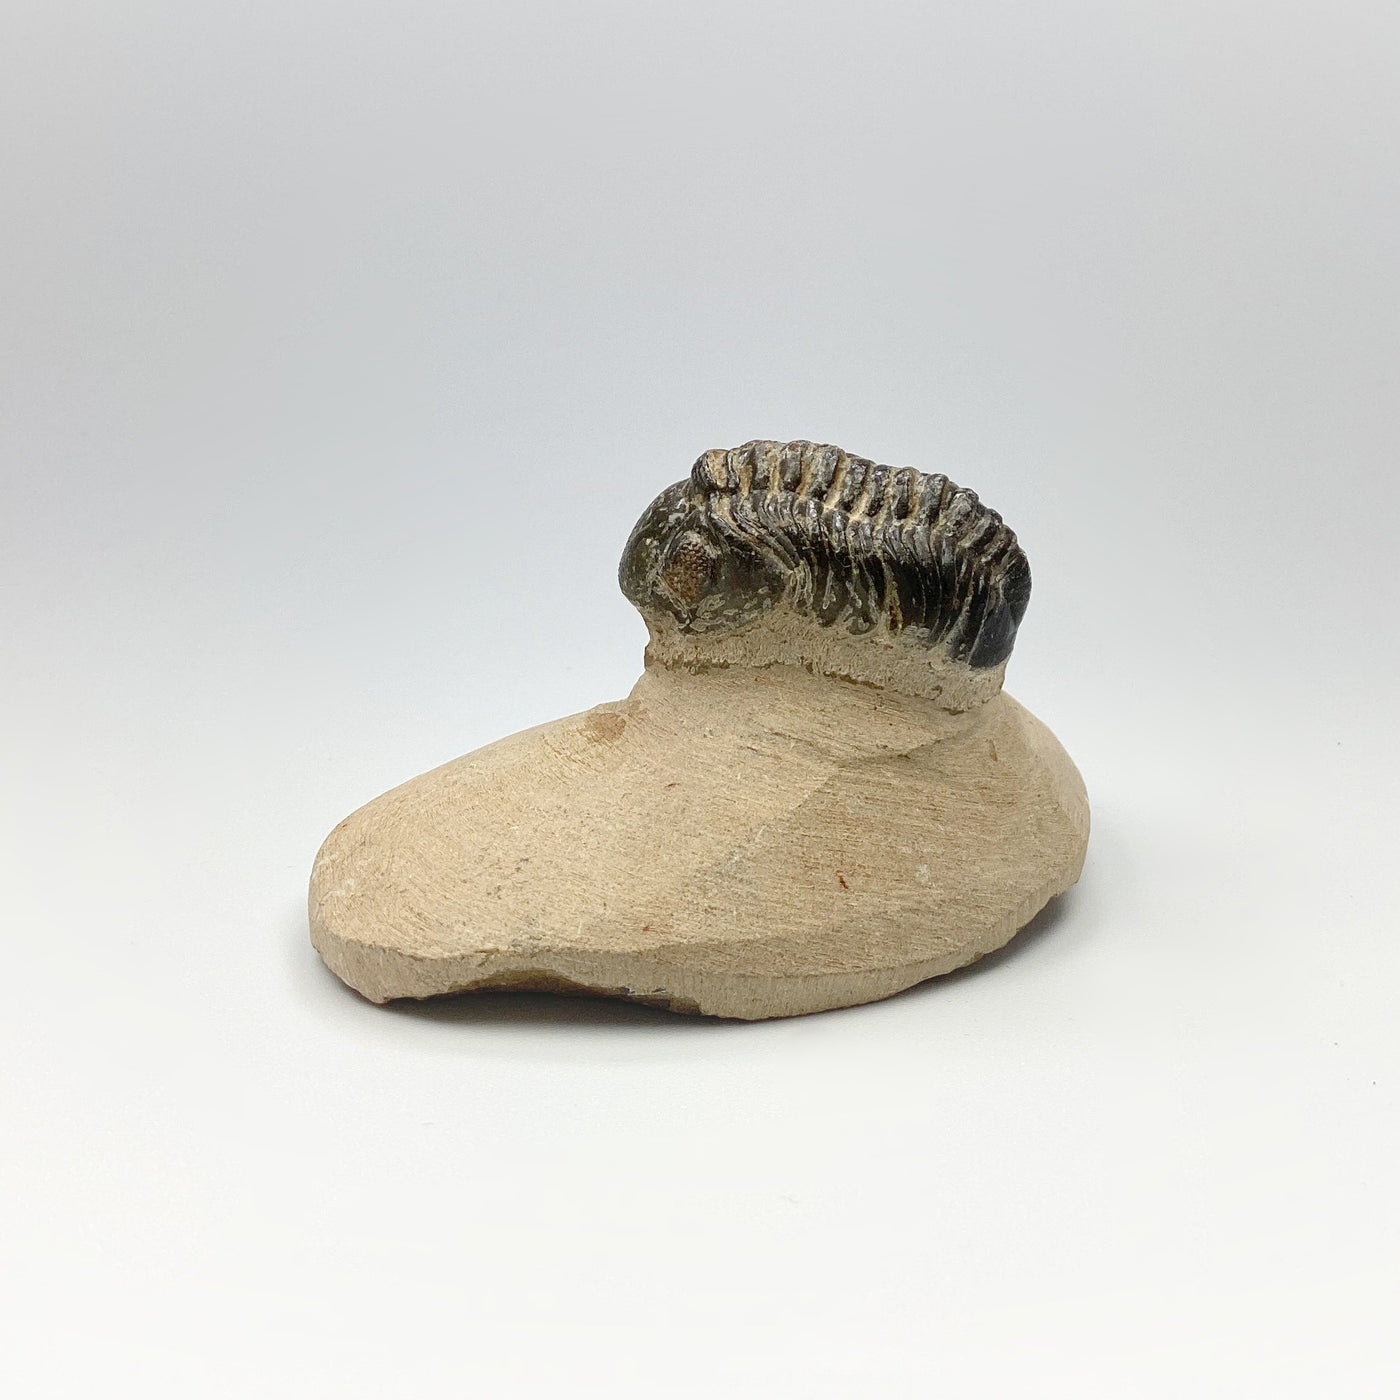 Trilobite Reedops Fossil